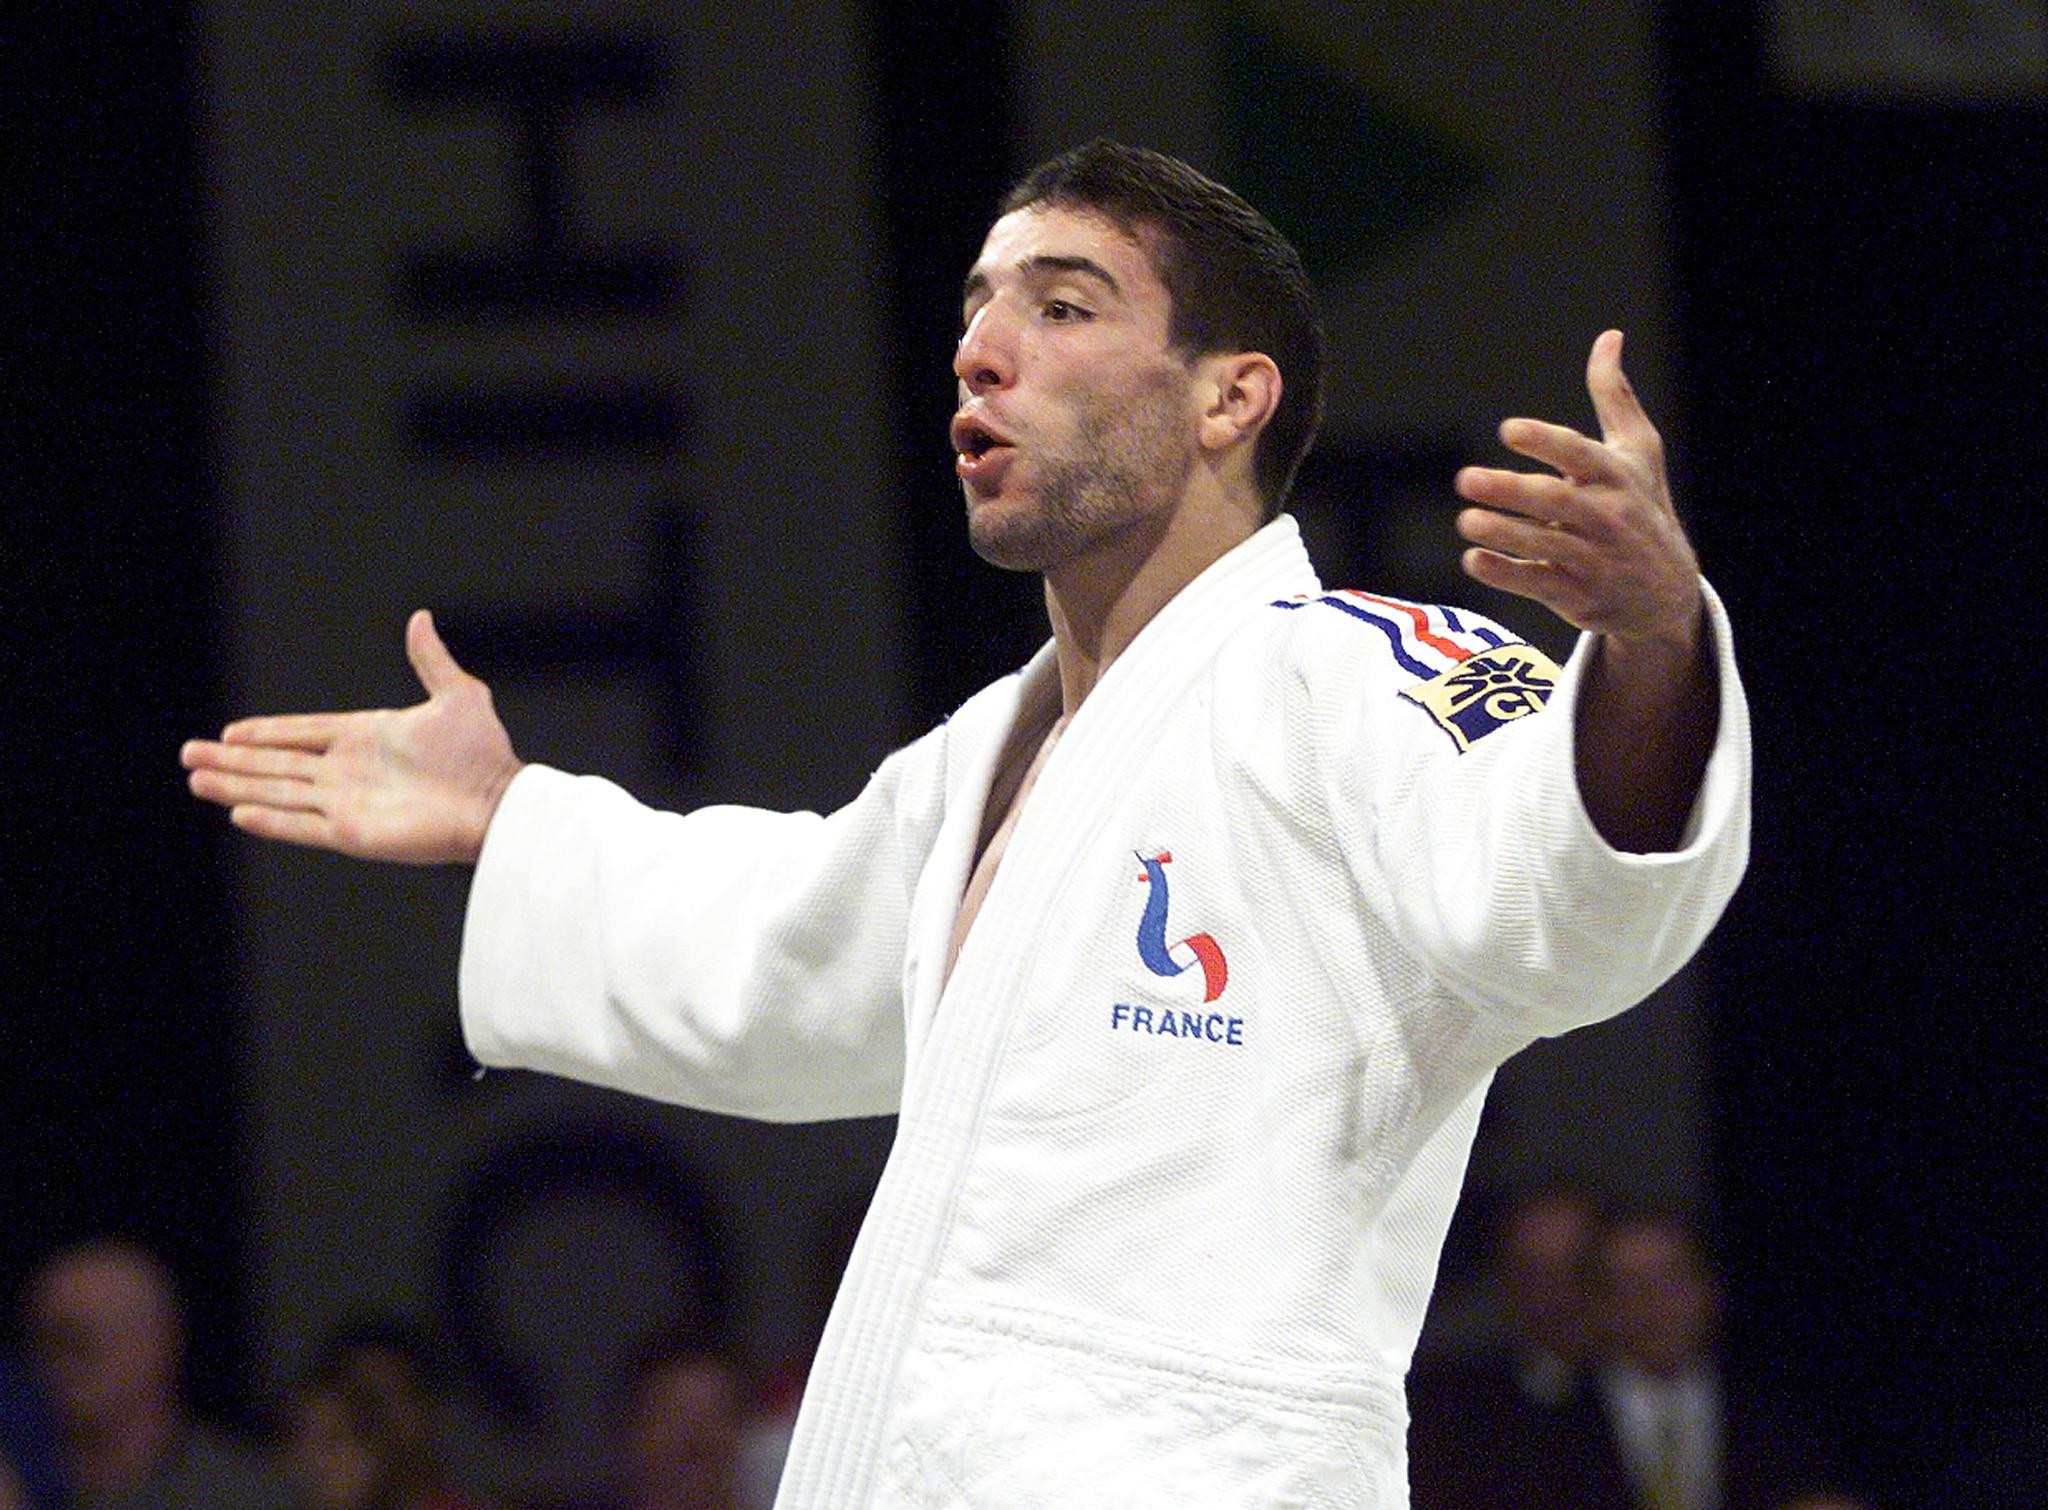 Olympic silver medallist Larbi Benboudaoud has been named as high performance director at the FFJ ©Getty Images